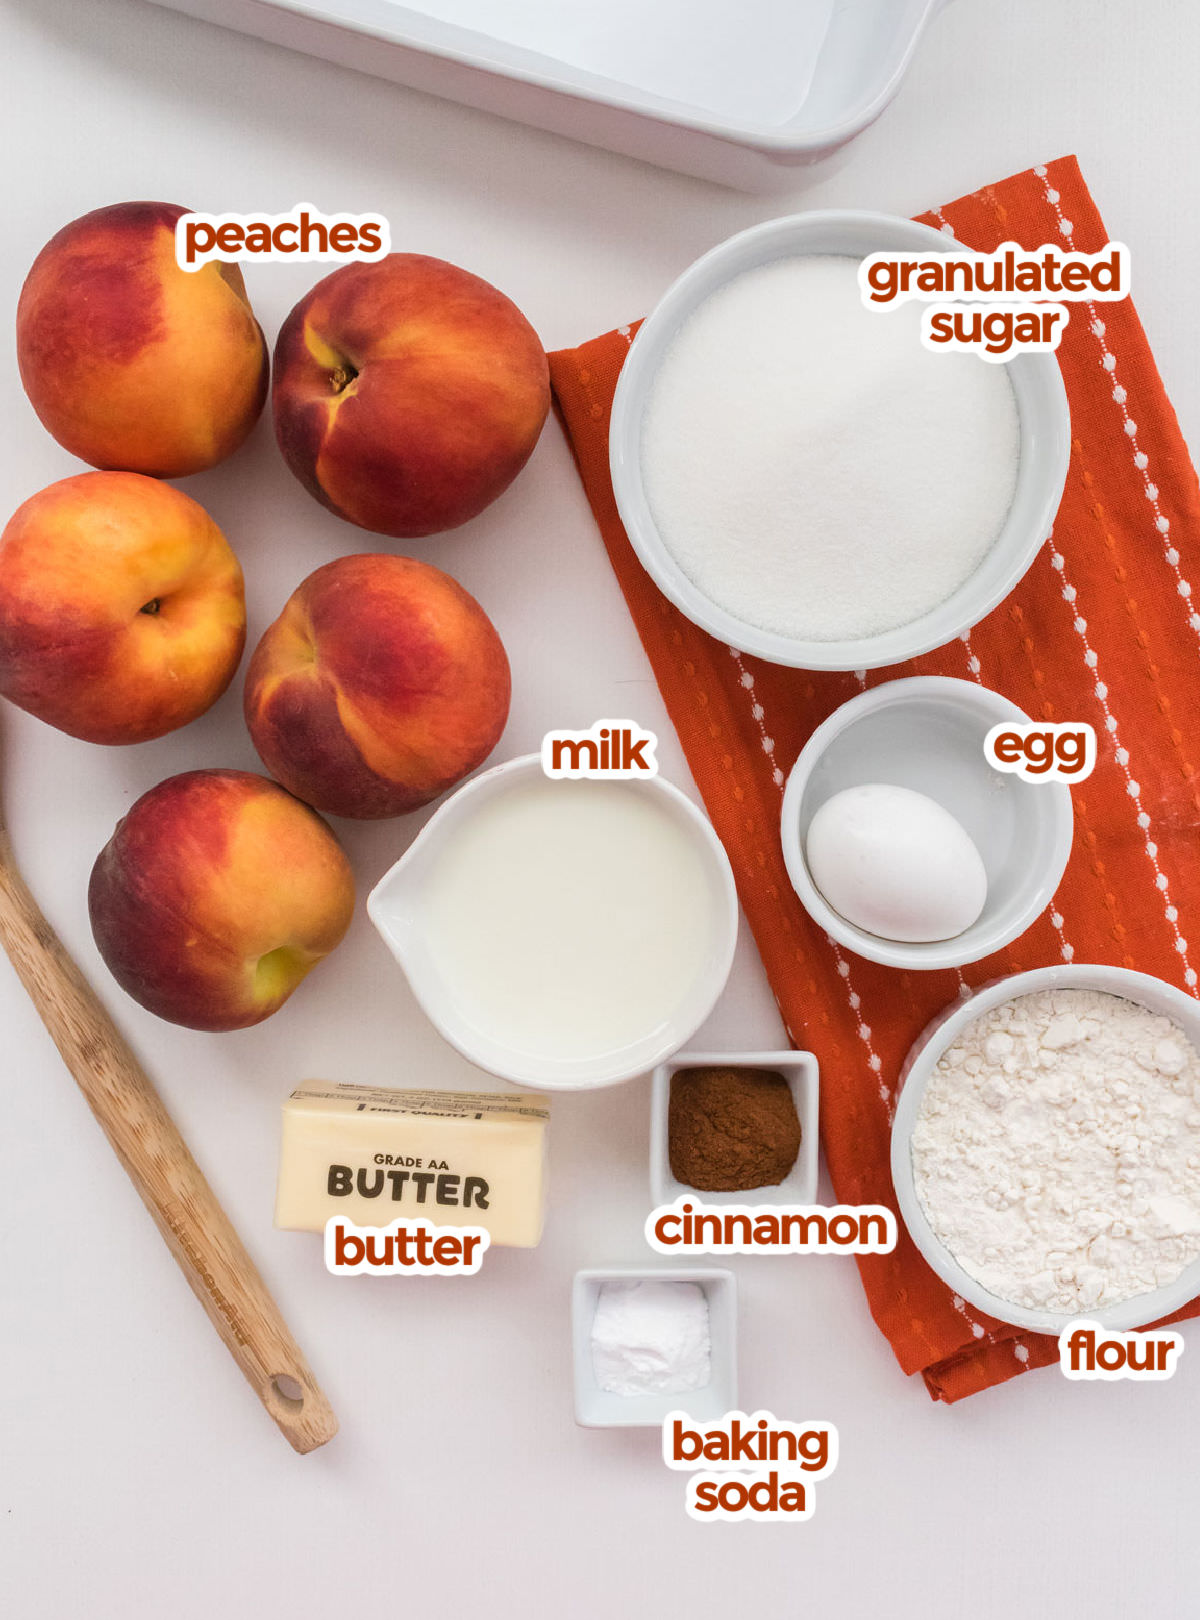 All the ingredients you will need to make Old Fashioned Peach Cobbler including Peaches, Sugar, Egg, Milk, Flour, Cinnamon, Baking Soda and Butter.